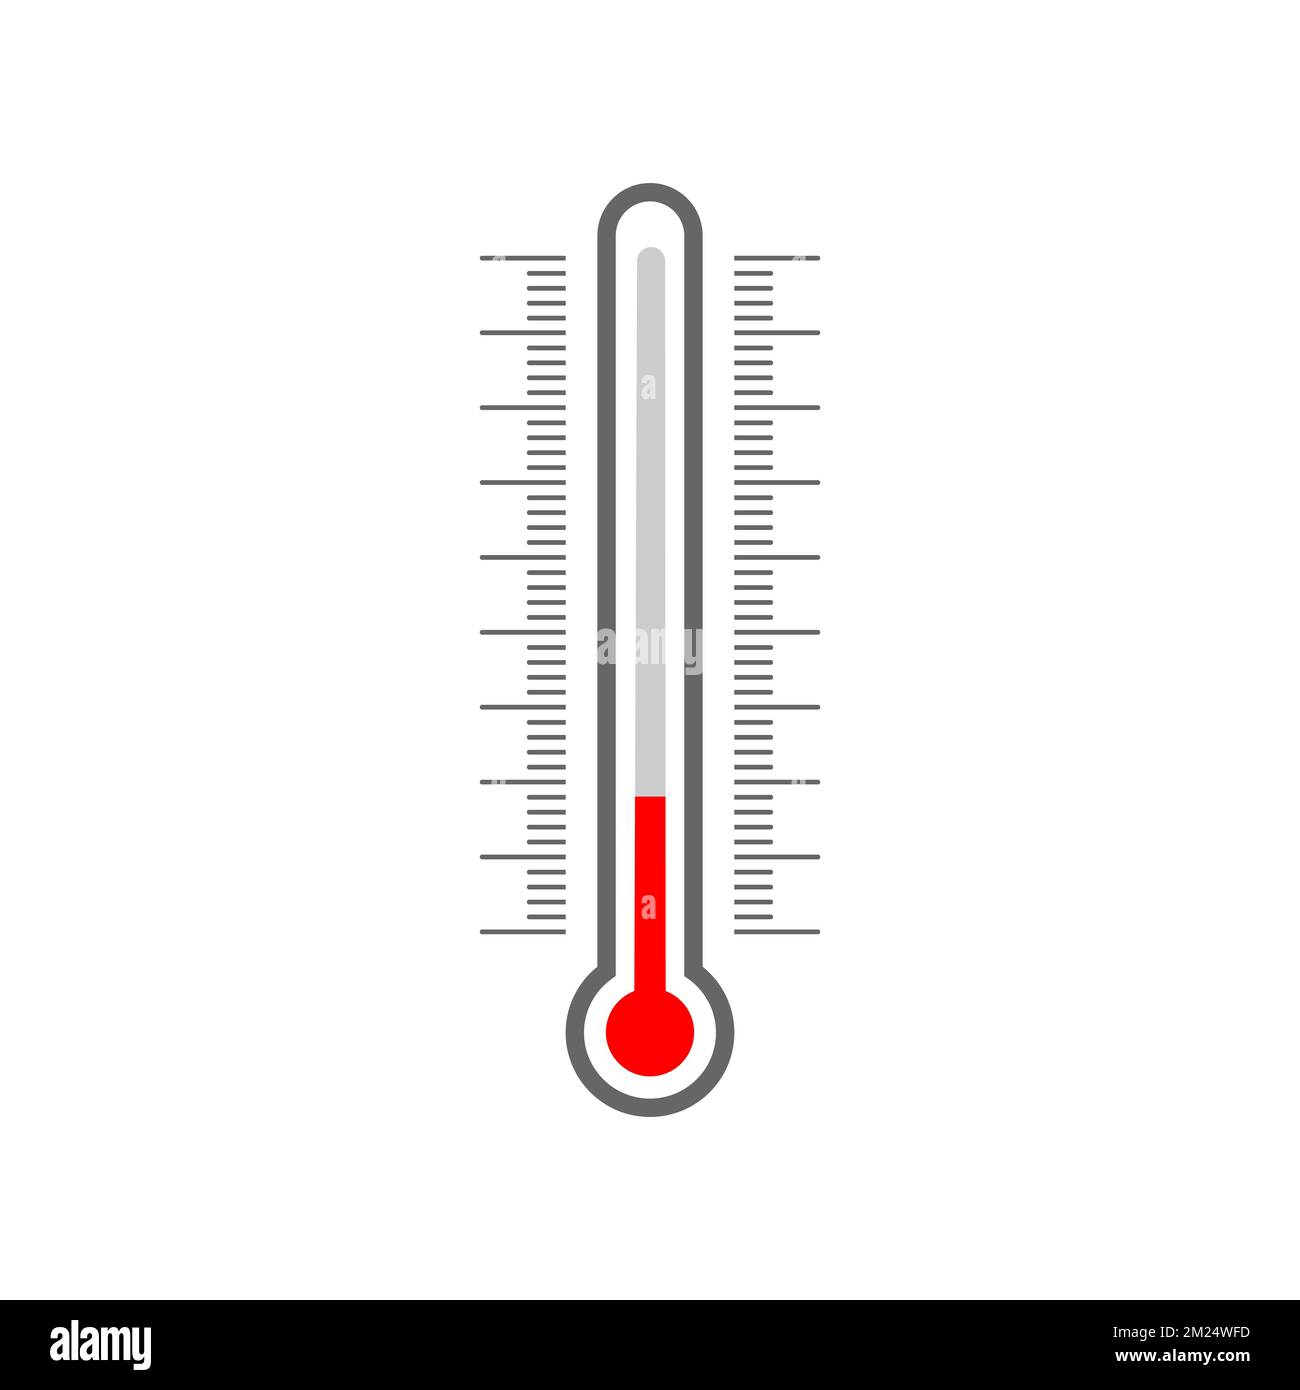 https://c8.alamy.com/comp/2M24WFD/meteorological-thermometer-glass-tube-silhouette-and-celsius-and-fahrenheit-degree-scale-temperature-measuring-climate-control-tool-isolated-on-white-background-vector-flat-illustration-2M24WFD.jpg